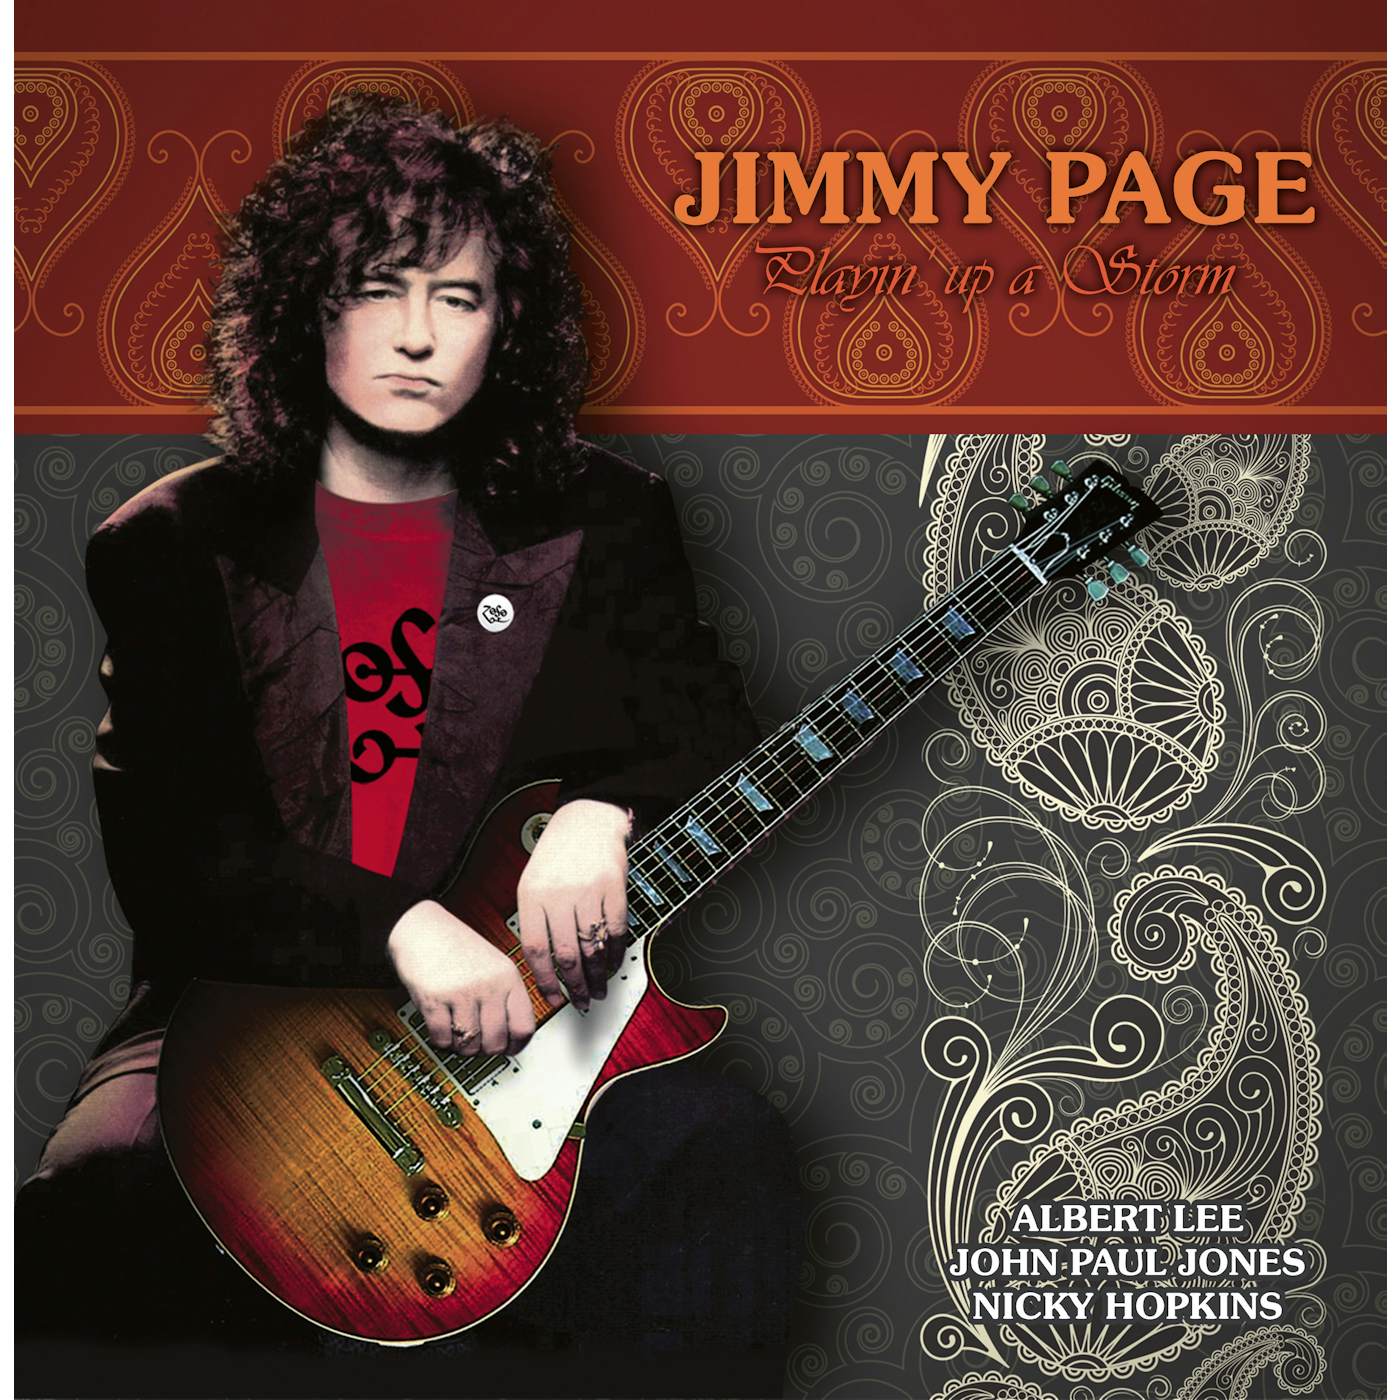 Jimmy Page Playin' Up a Storm Vinyl Record